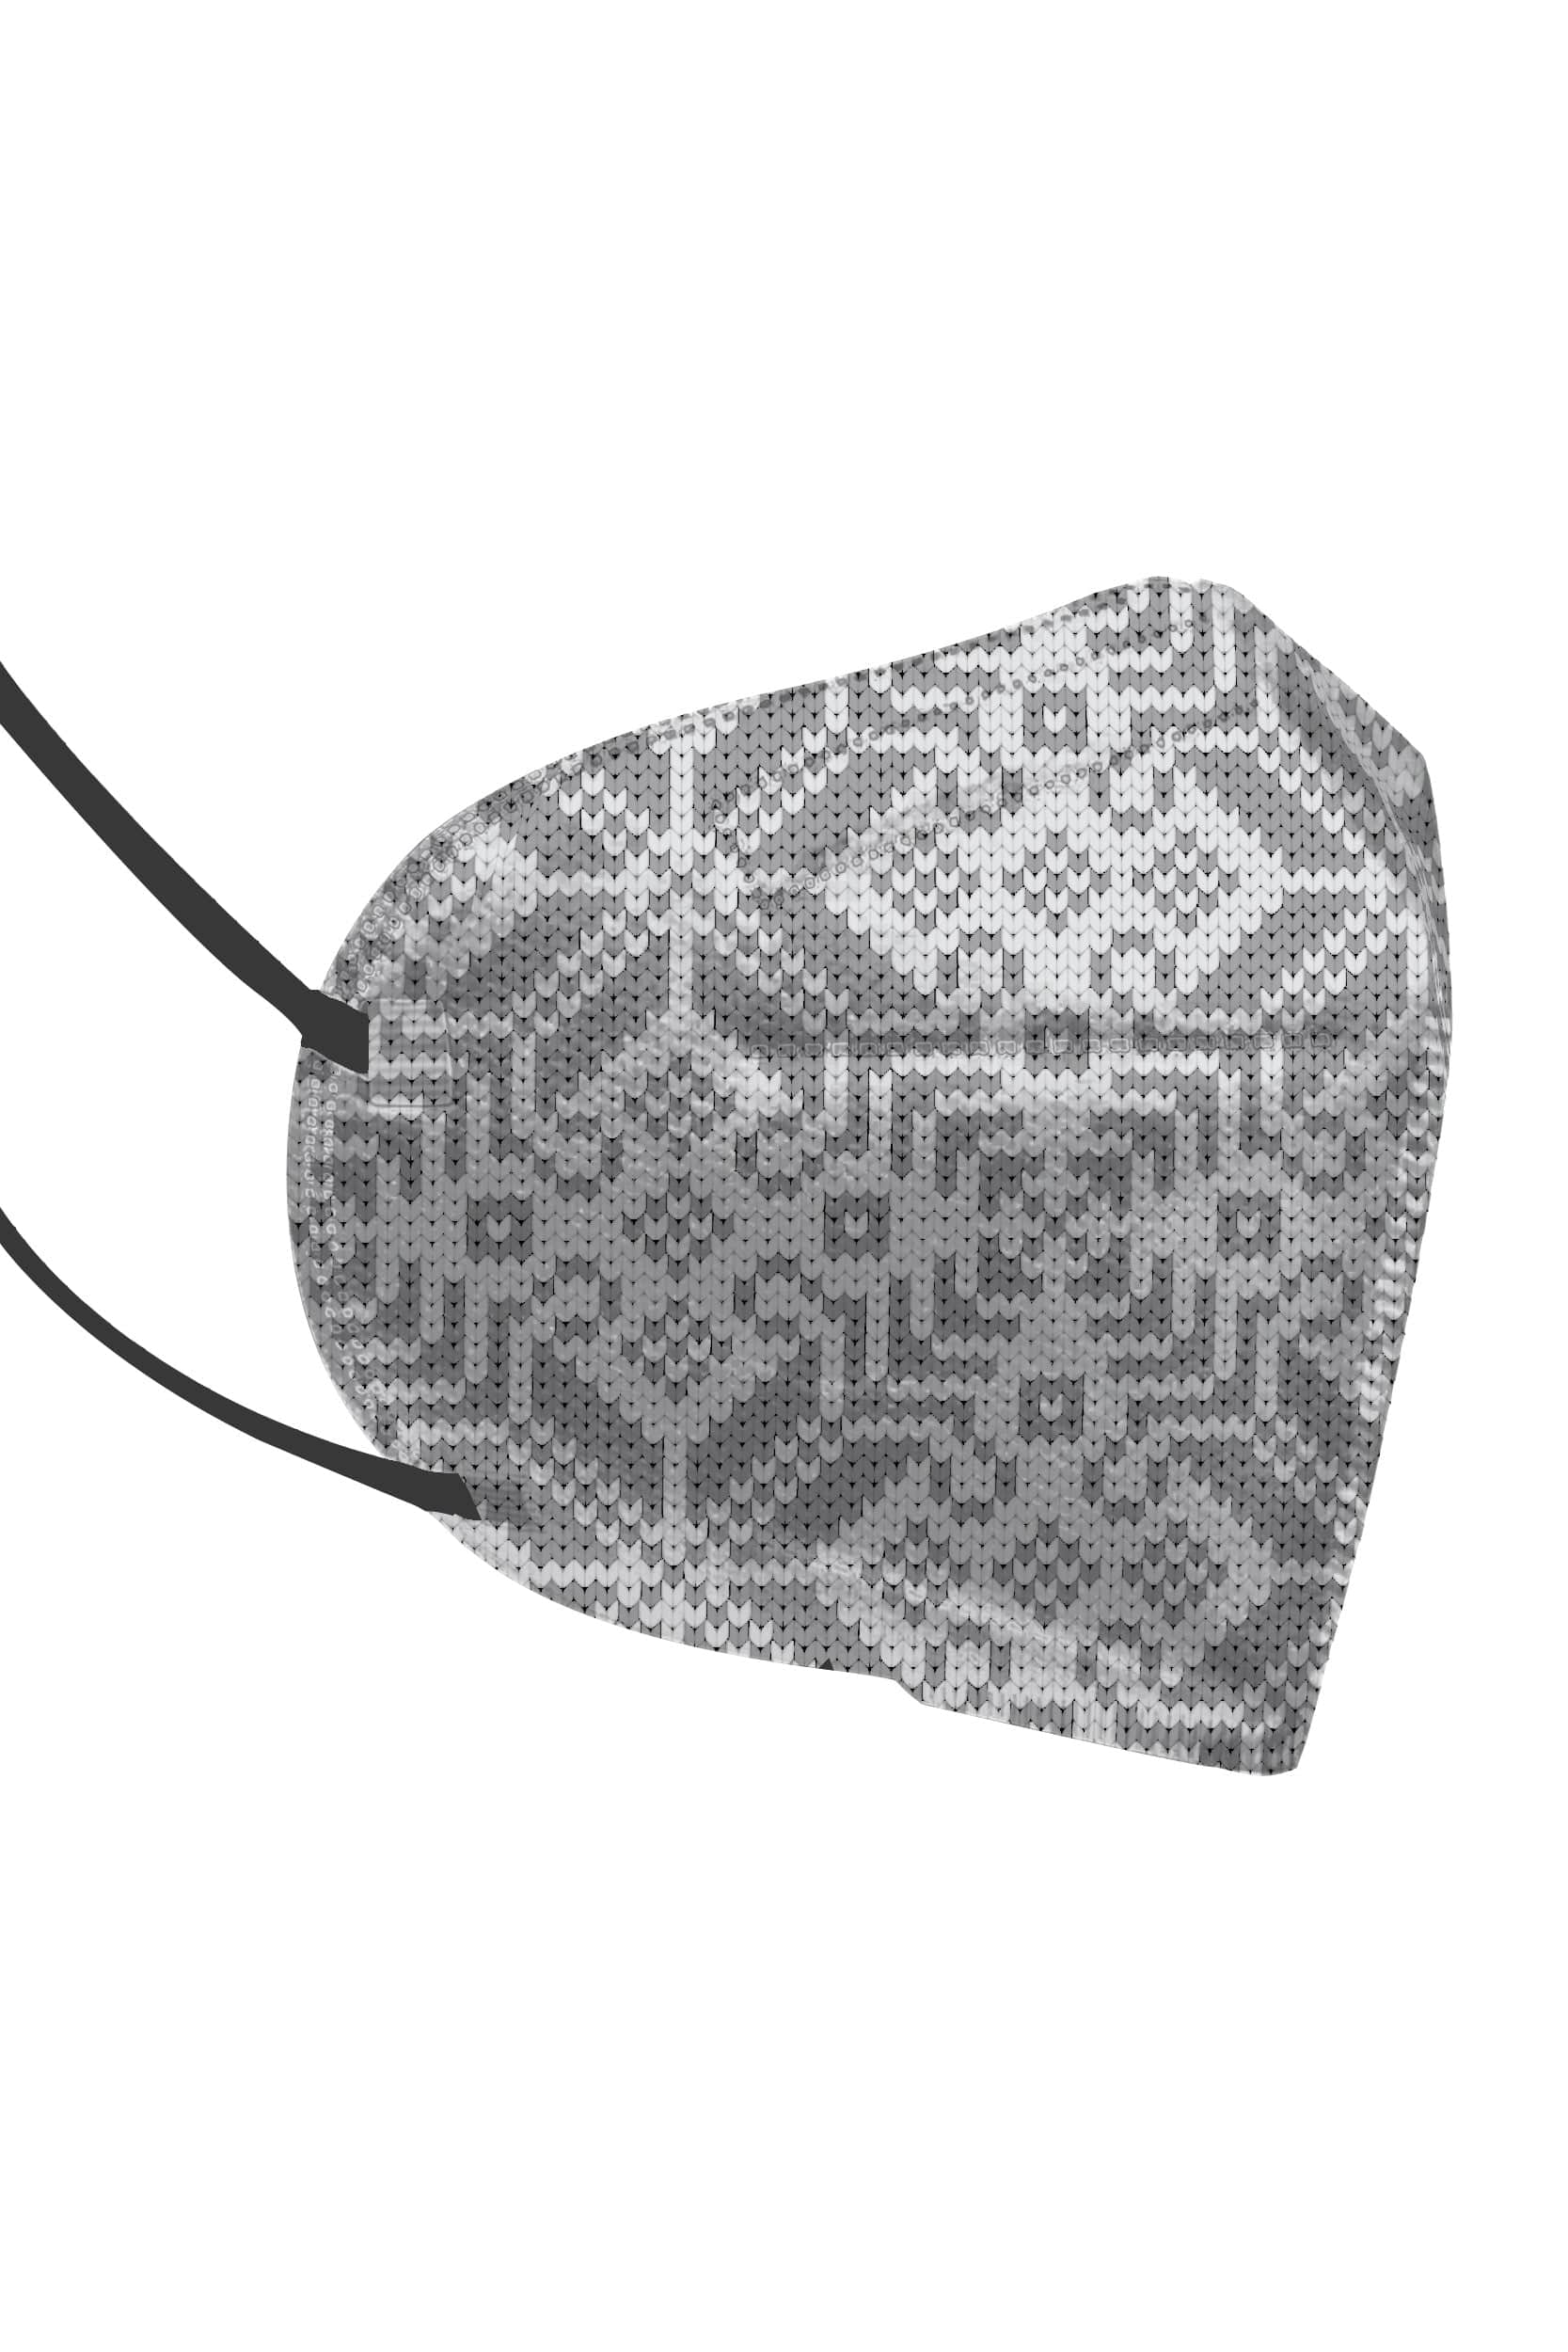 Stylish Geometric Print KN95 face mask, with soft black ear loops and high quality fabric. 